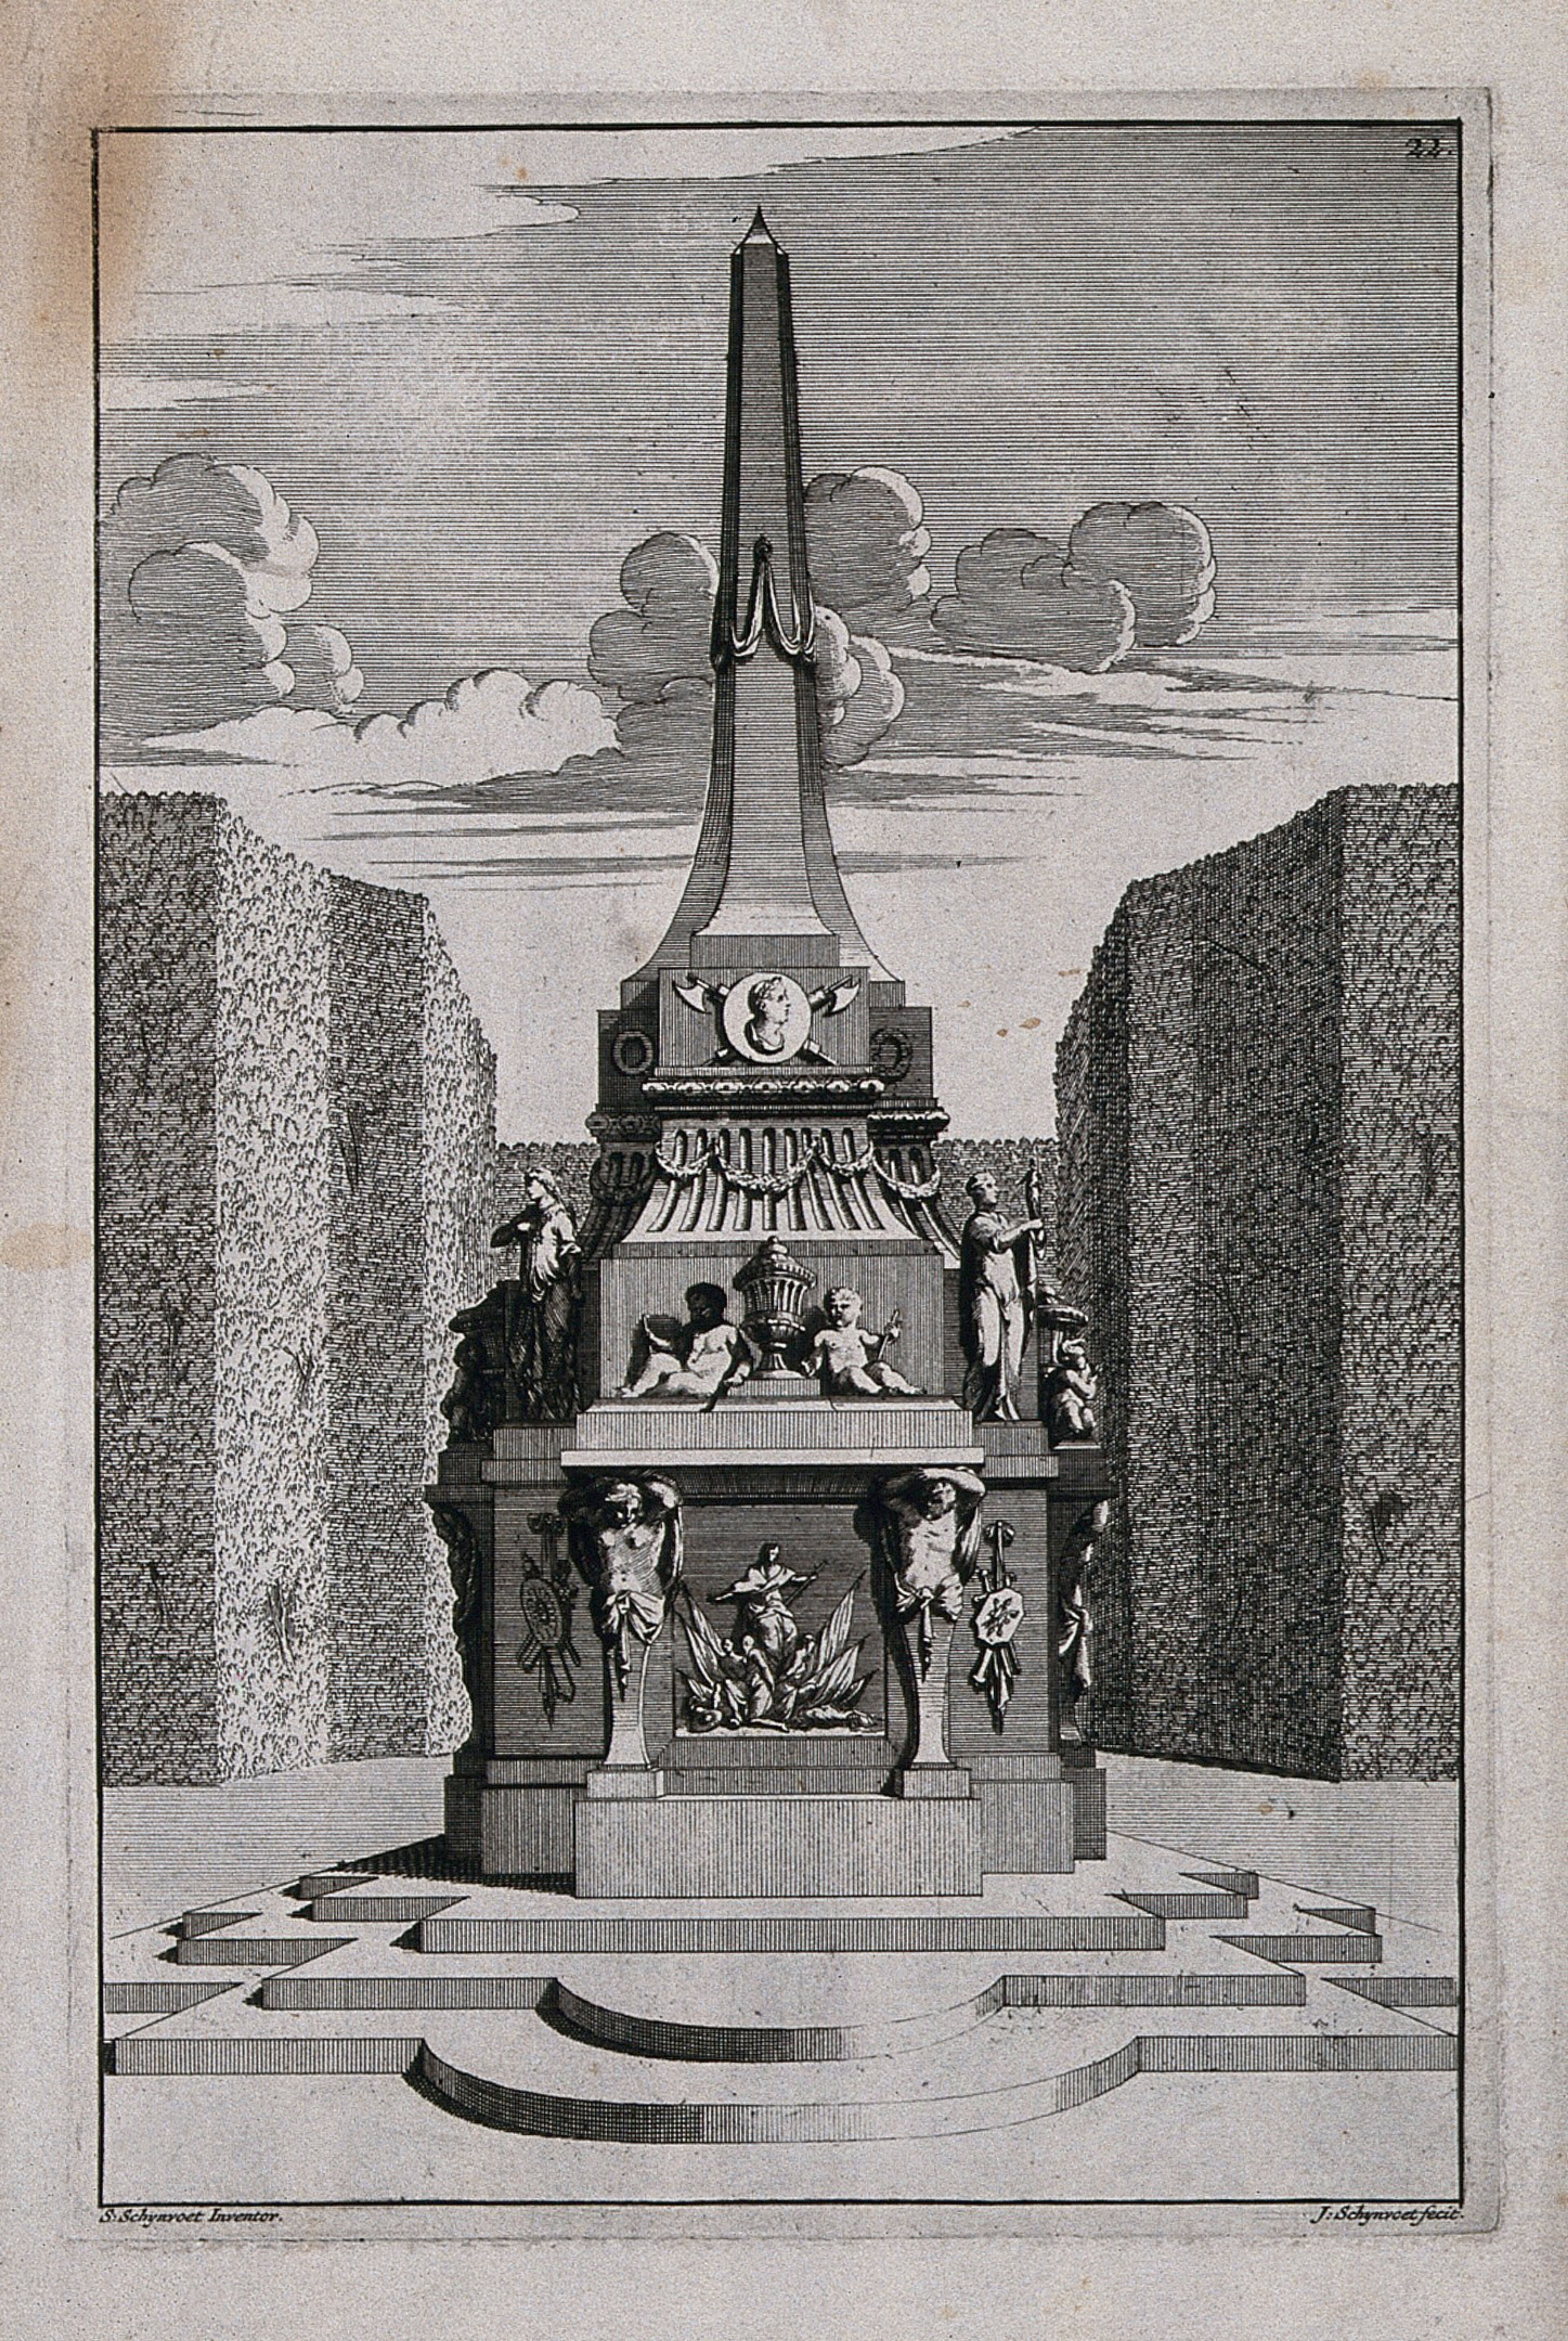 An ornate garden obelisk embellished with statues and urns. Etching by J. Schynvoet after S. Schynvoet, early 18th century.